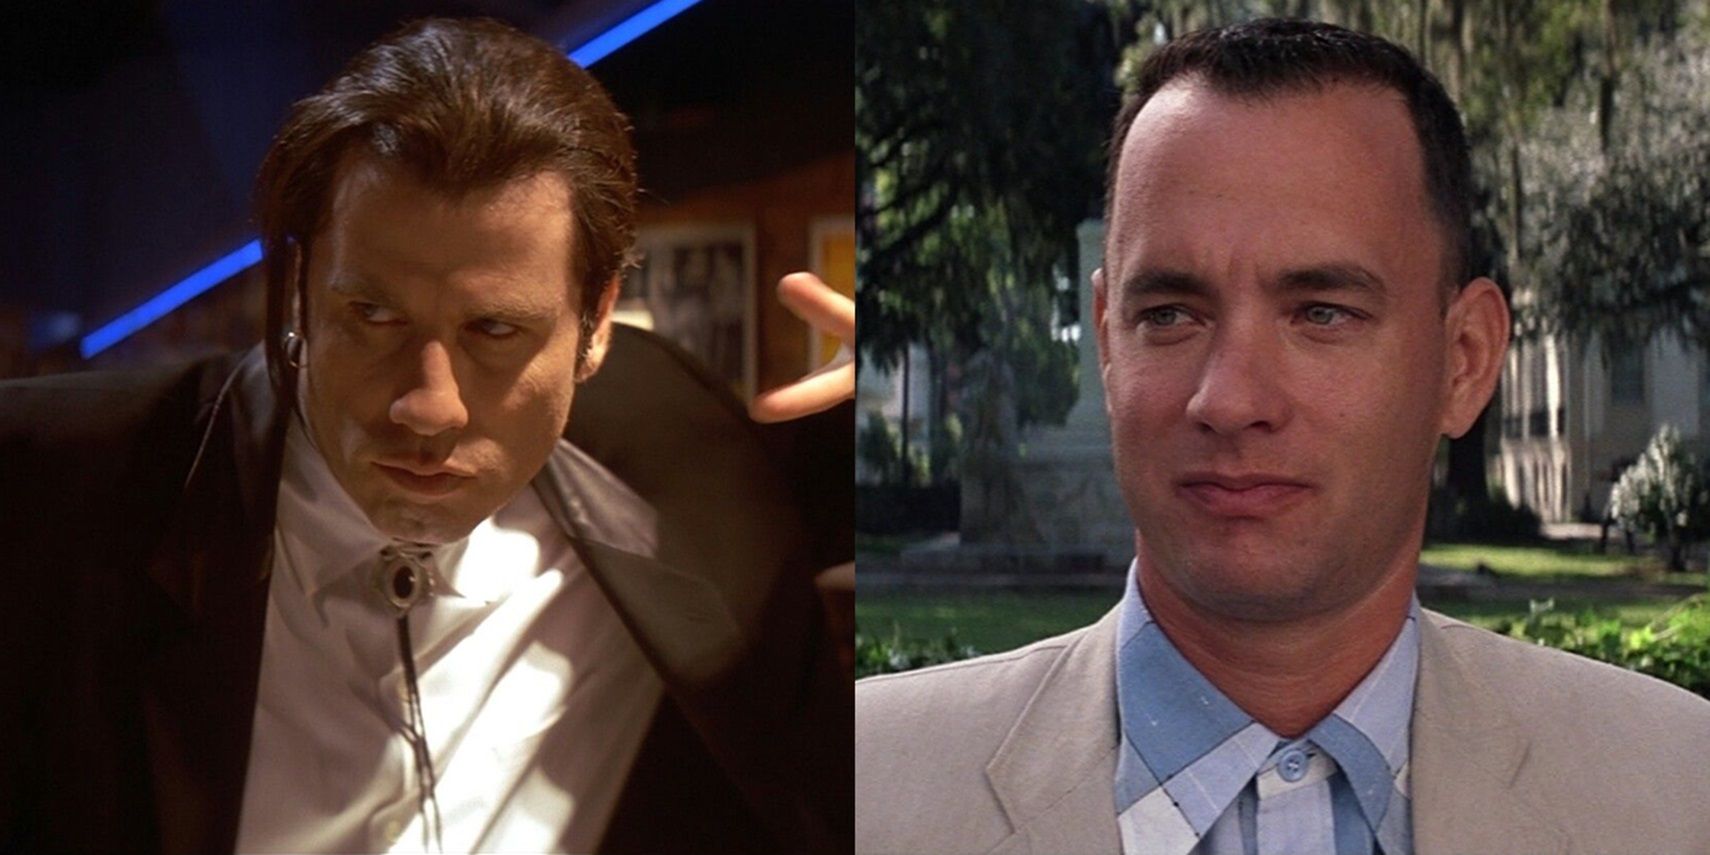 John Travolta in Pulp Fiction and Tom Hanks in Forrest Gump